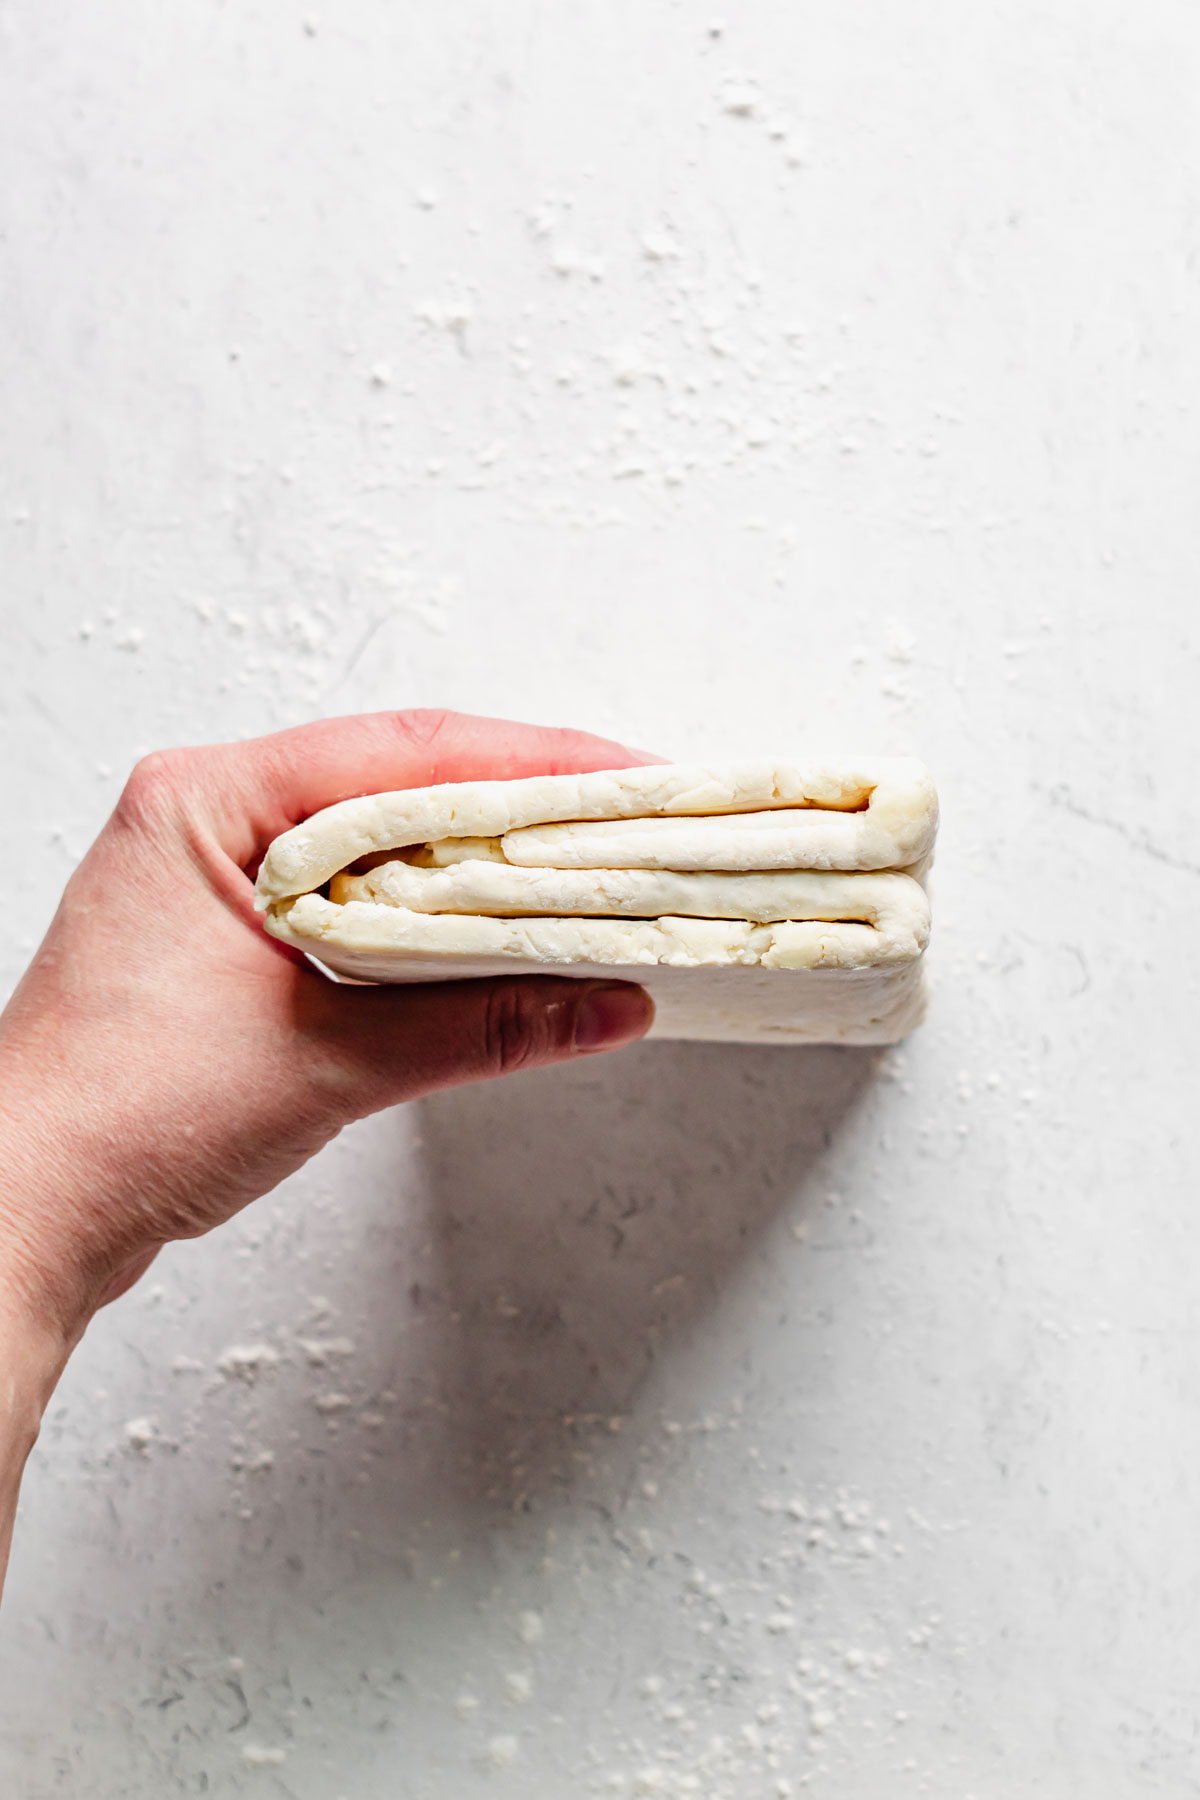 A hand holds the dough up to show the trifold inside.